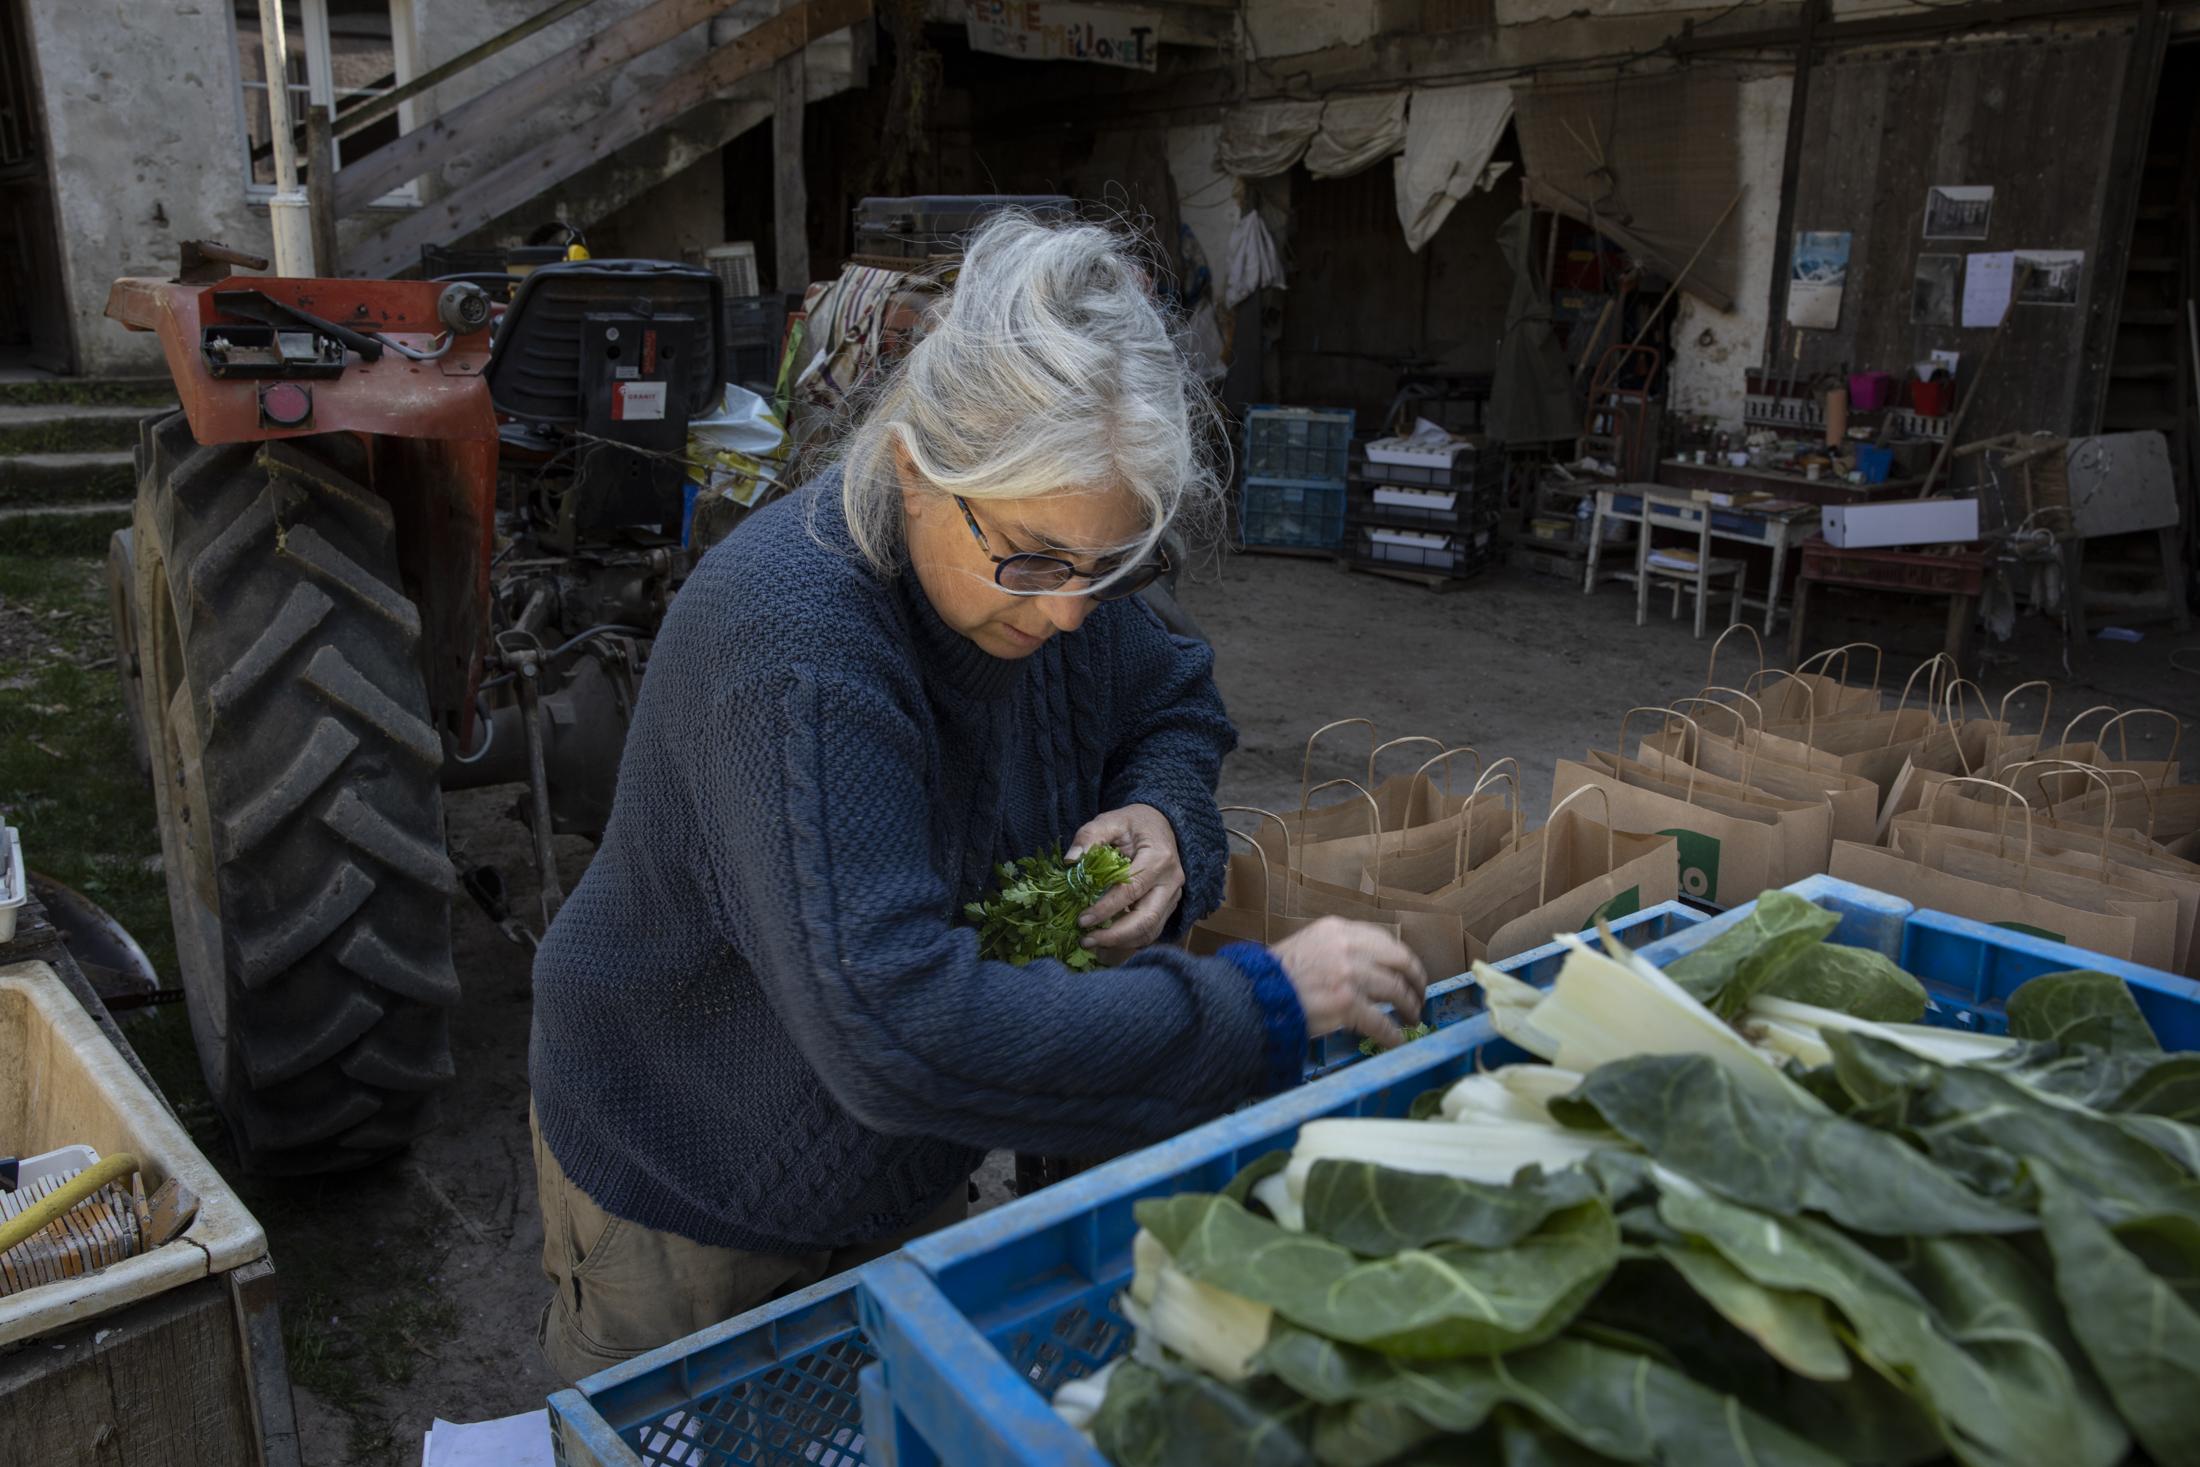 A Possible Agriculture - Sophie Dutly, 59, is handly preparing vegetable baskets...